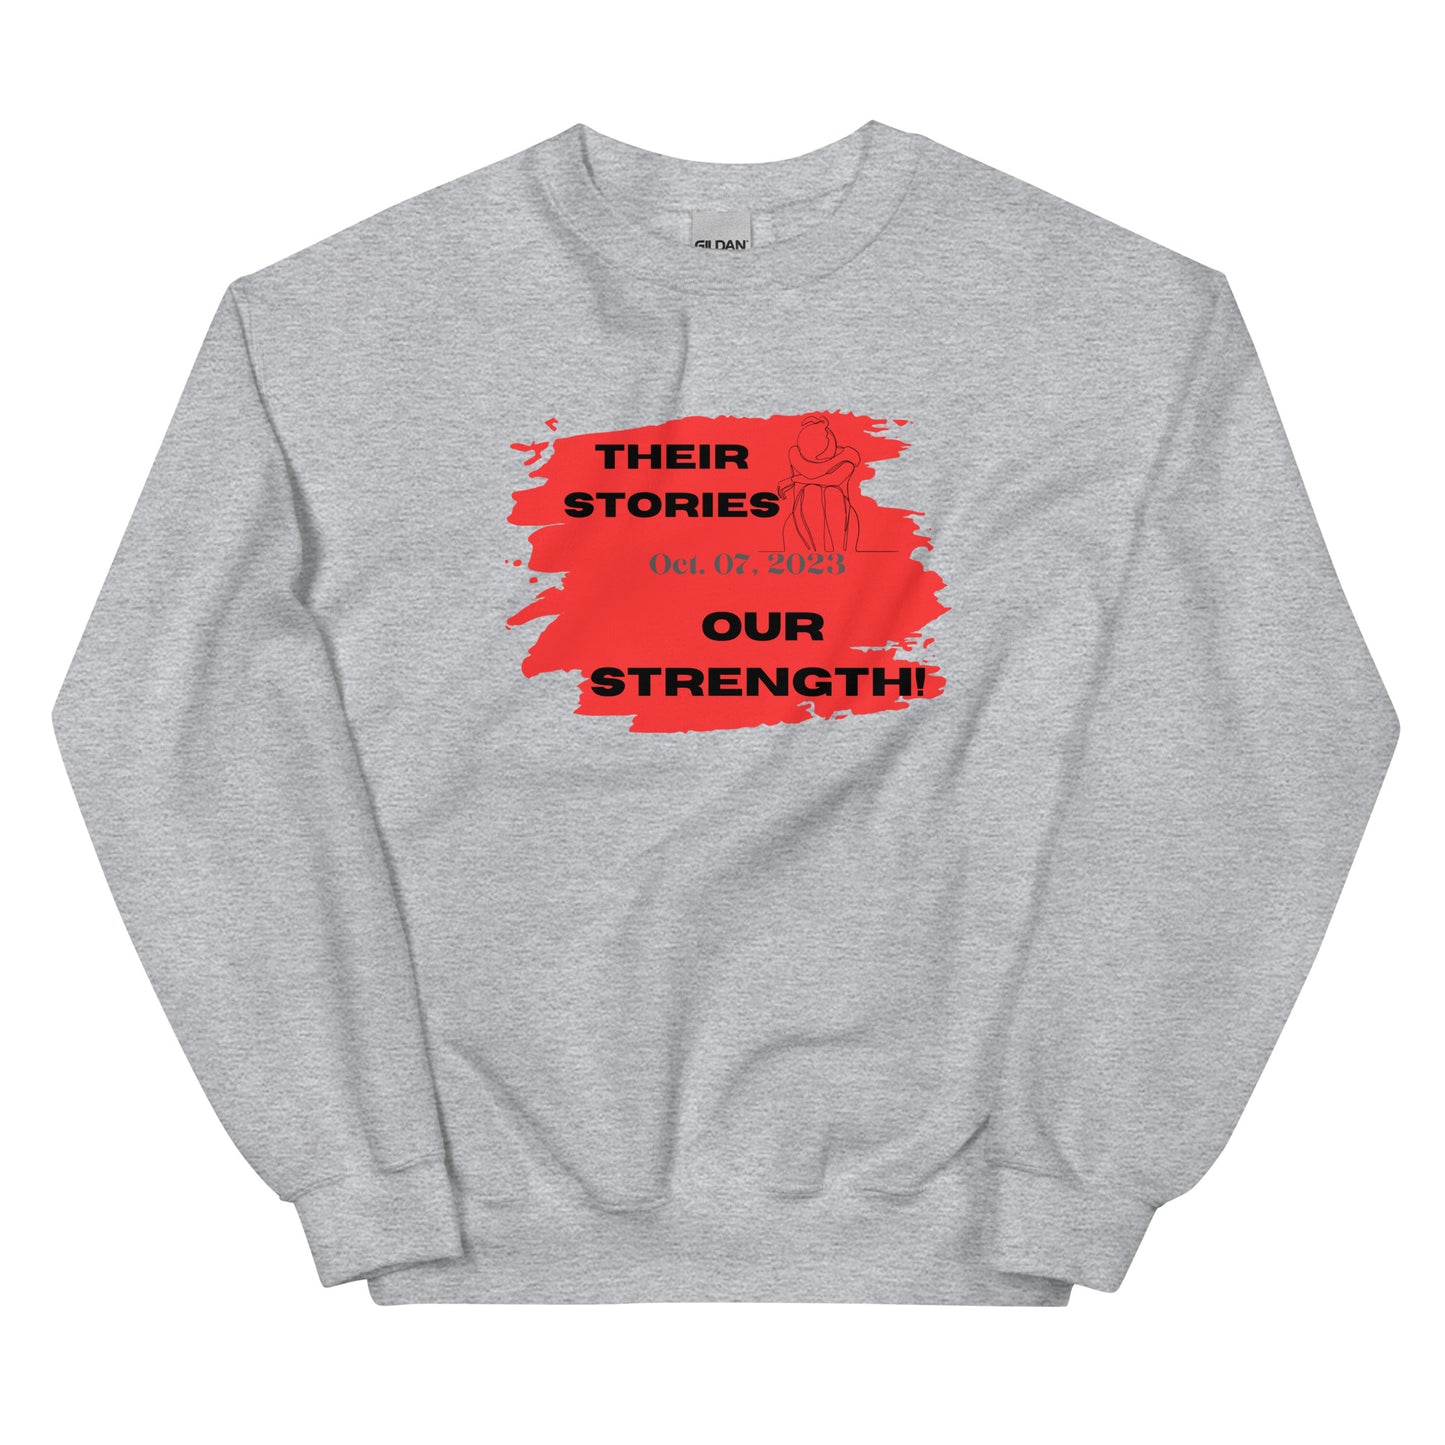 Their stories, our strength - Unisex Sweatshirt (10 colors)